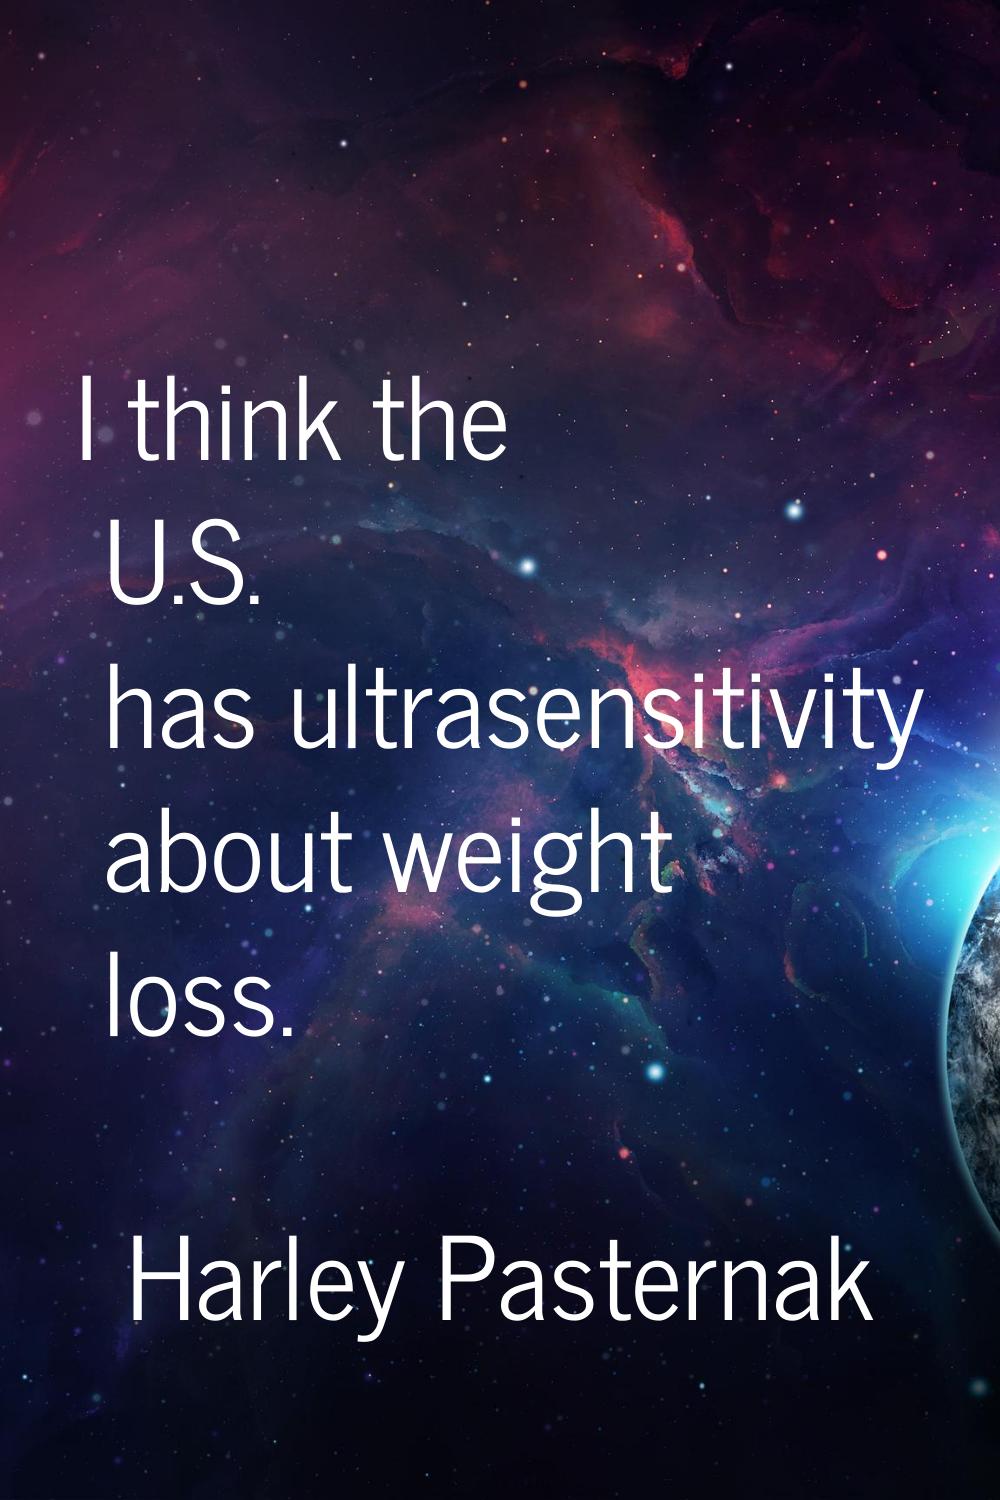 I think the U.S. has ultrasensitivity about weight loss.